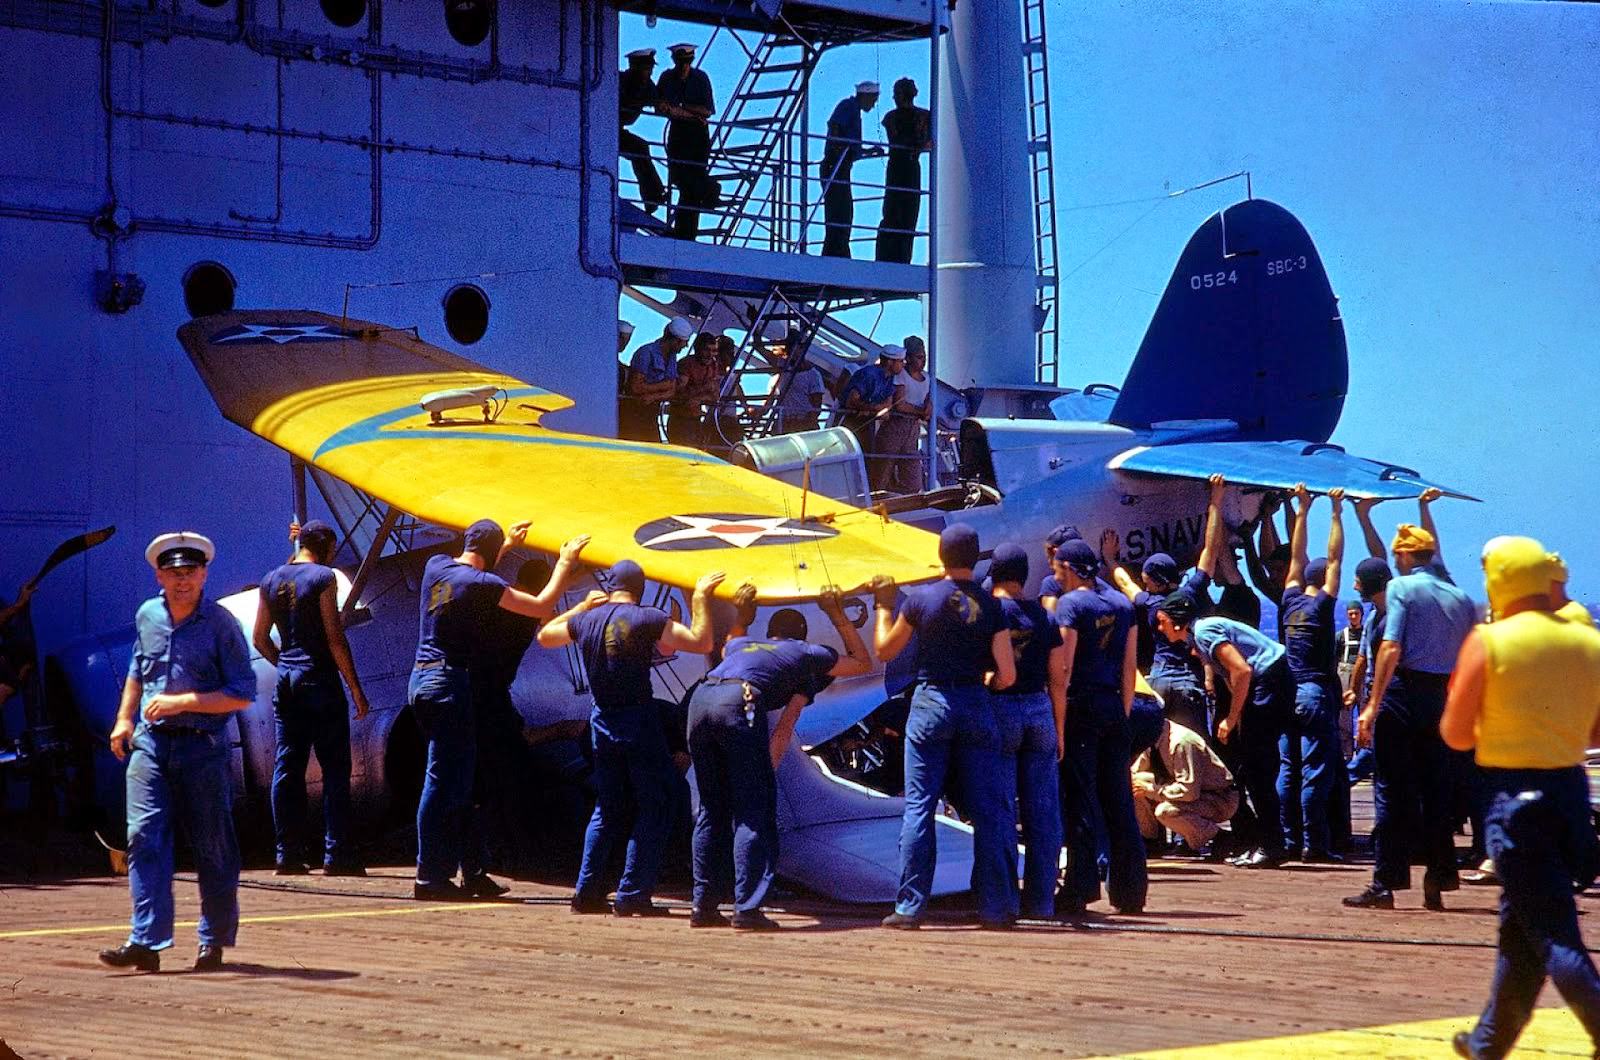 Crew removing plane which has made a slight crash landing aboard the aircraft carrier Enterprise CV-6 during the US Navy's Pacific Fleet maneuvers in 1940.